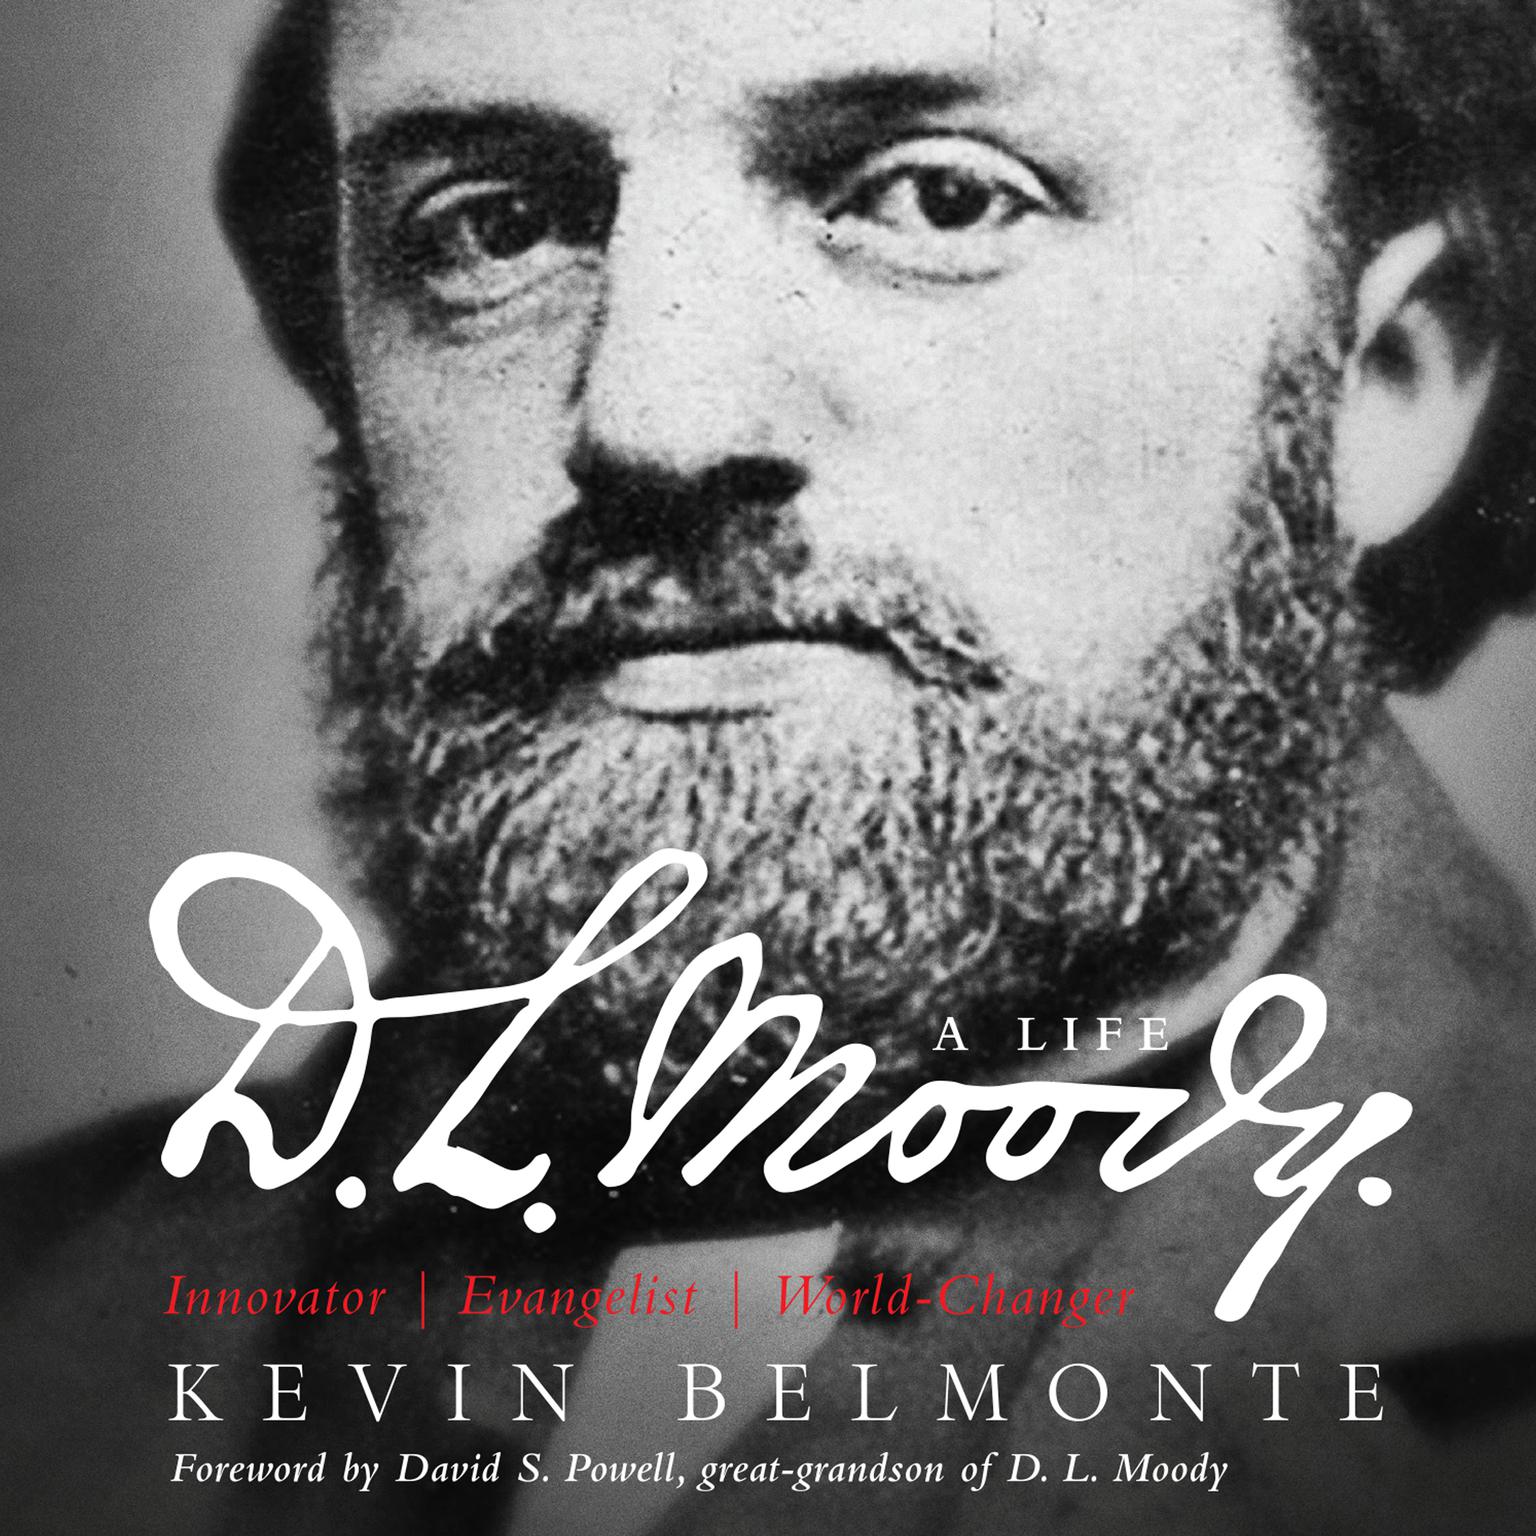 D.L. Moody - A Life: Innovator, Evangelist, World Changer Audiobook, by Kevin Belmonte